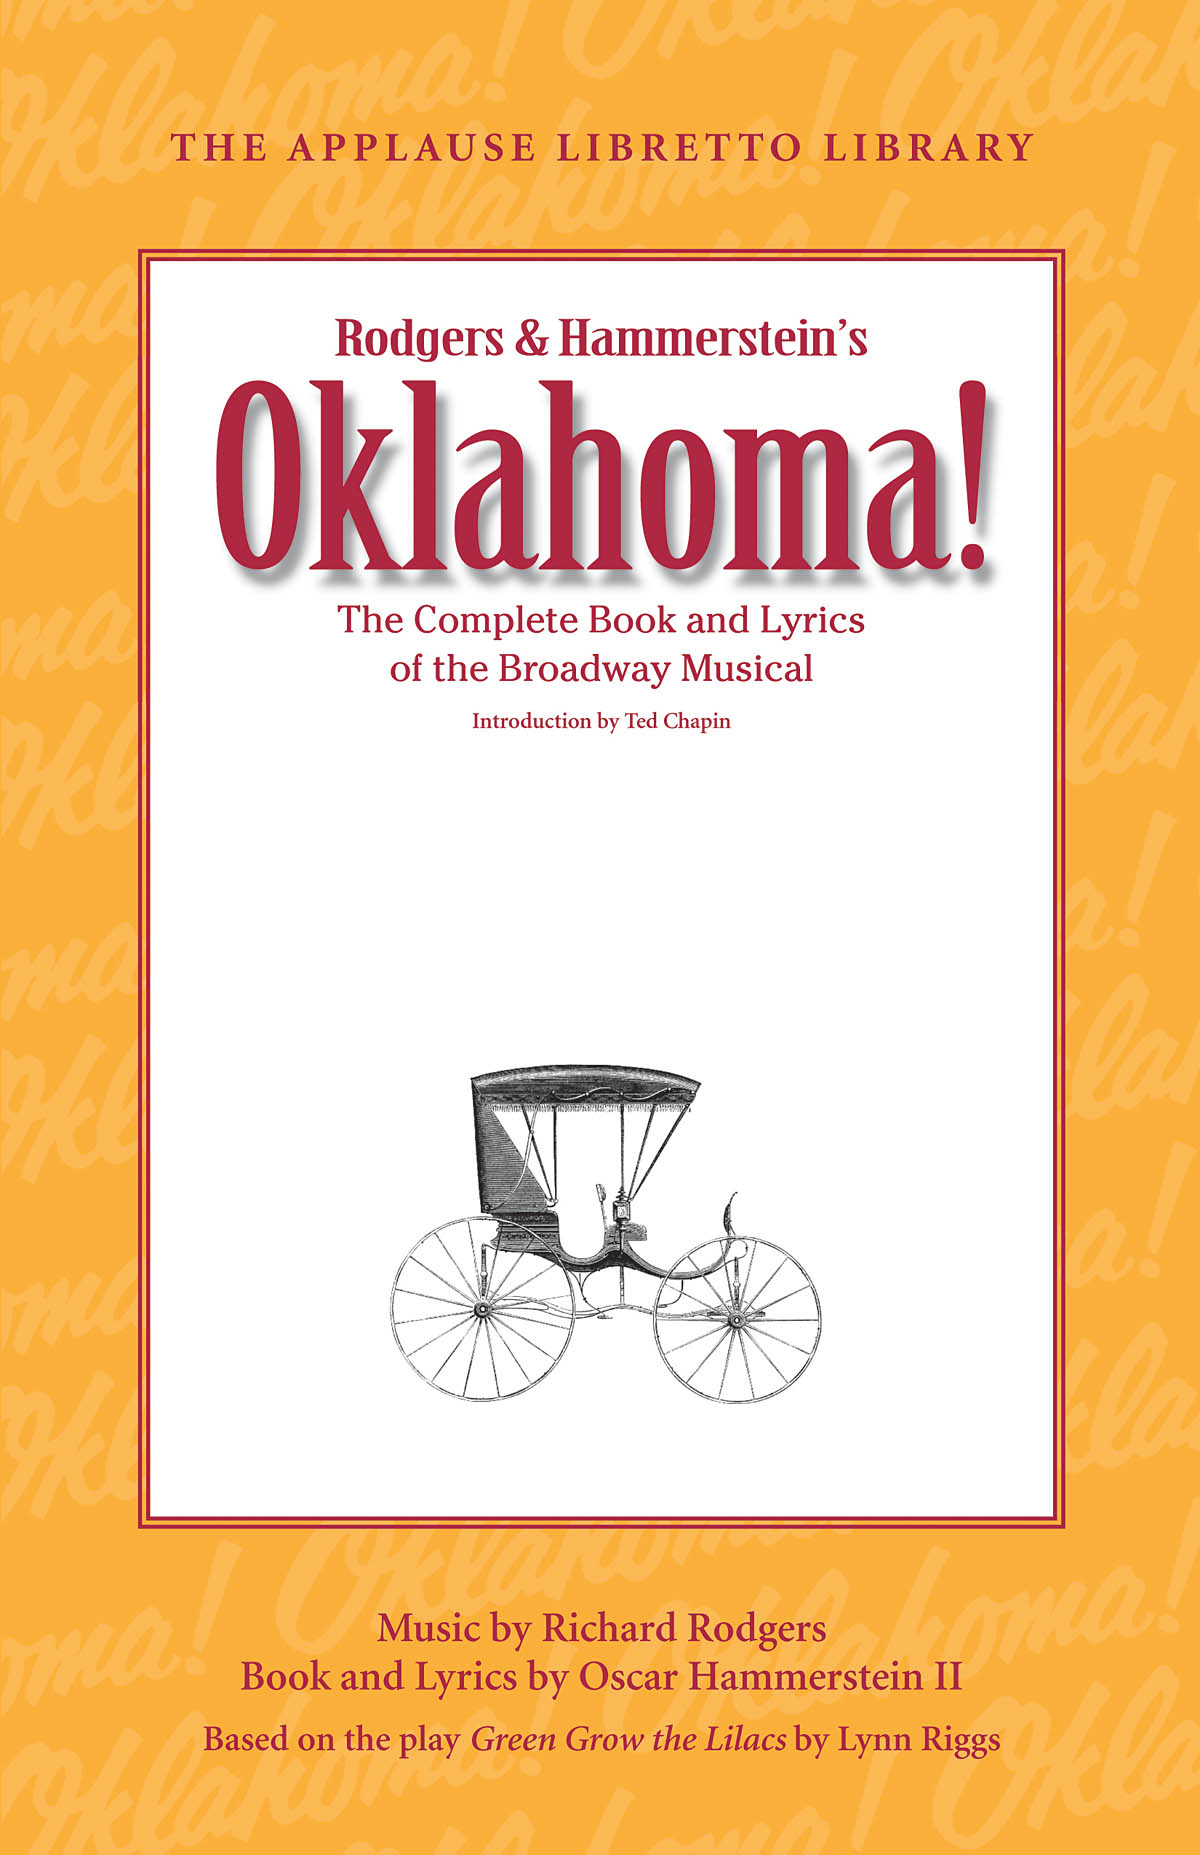 Oklahoma! The Applause Libretto Library(The Complete Book and Lyrics of the Broadway Musical)